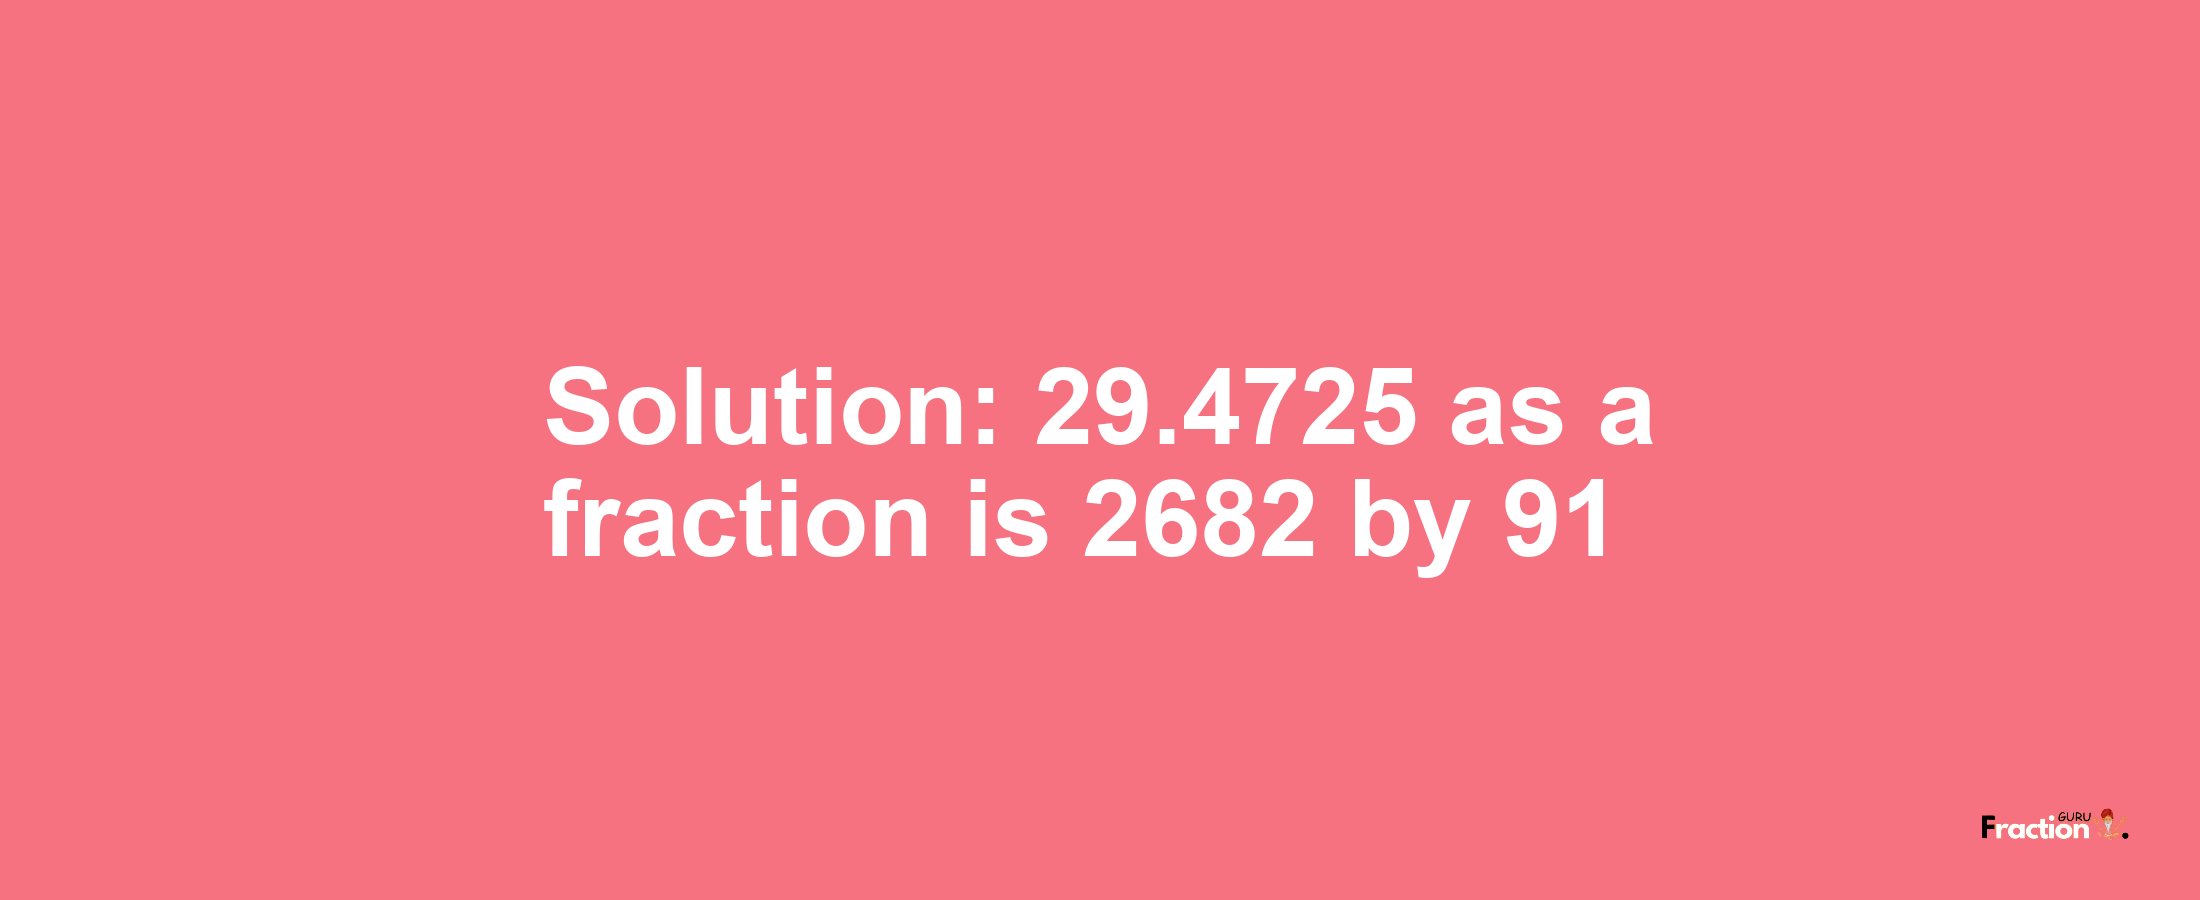 Solution:29.4725 as a fraction is 2682/91